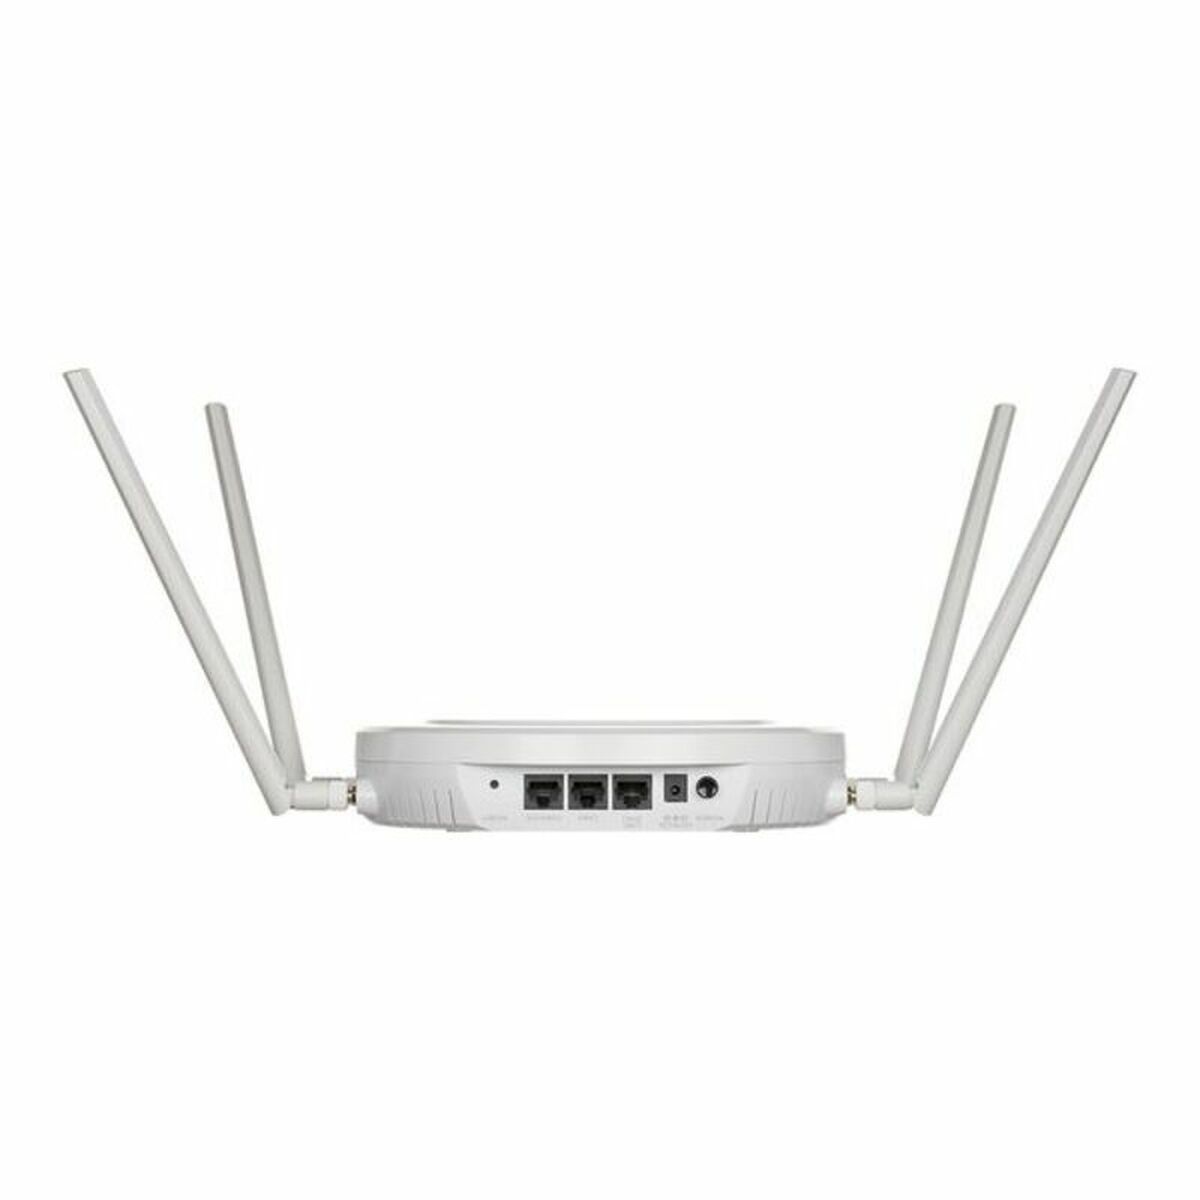 Access Point Repeater D-Link DWL-8620APE 5 GHz White, D-Link, Computing, Network devices, access-point-repeater-d-link-dwl-8620ape-5-ghz-white, Brand_D-Link, category-reference-2609, category-reference-2803, category-reference-2820, category-reference-t-19685, category-reference-t-19914, Condition_NEW, networks/wiring, Price_500 - 600, Teleworking, RiotNook